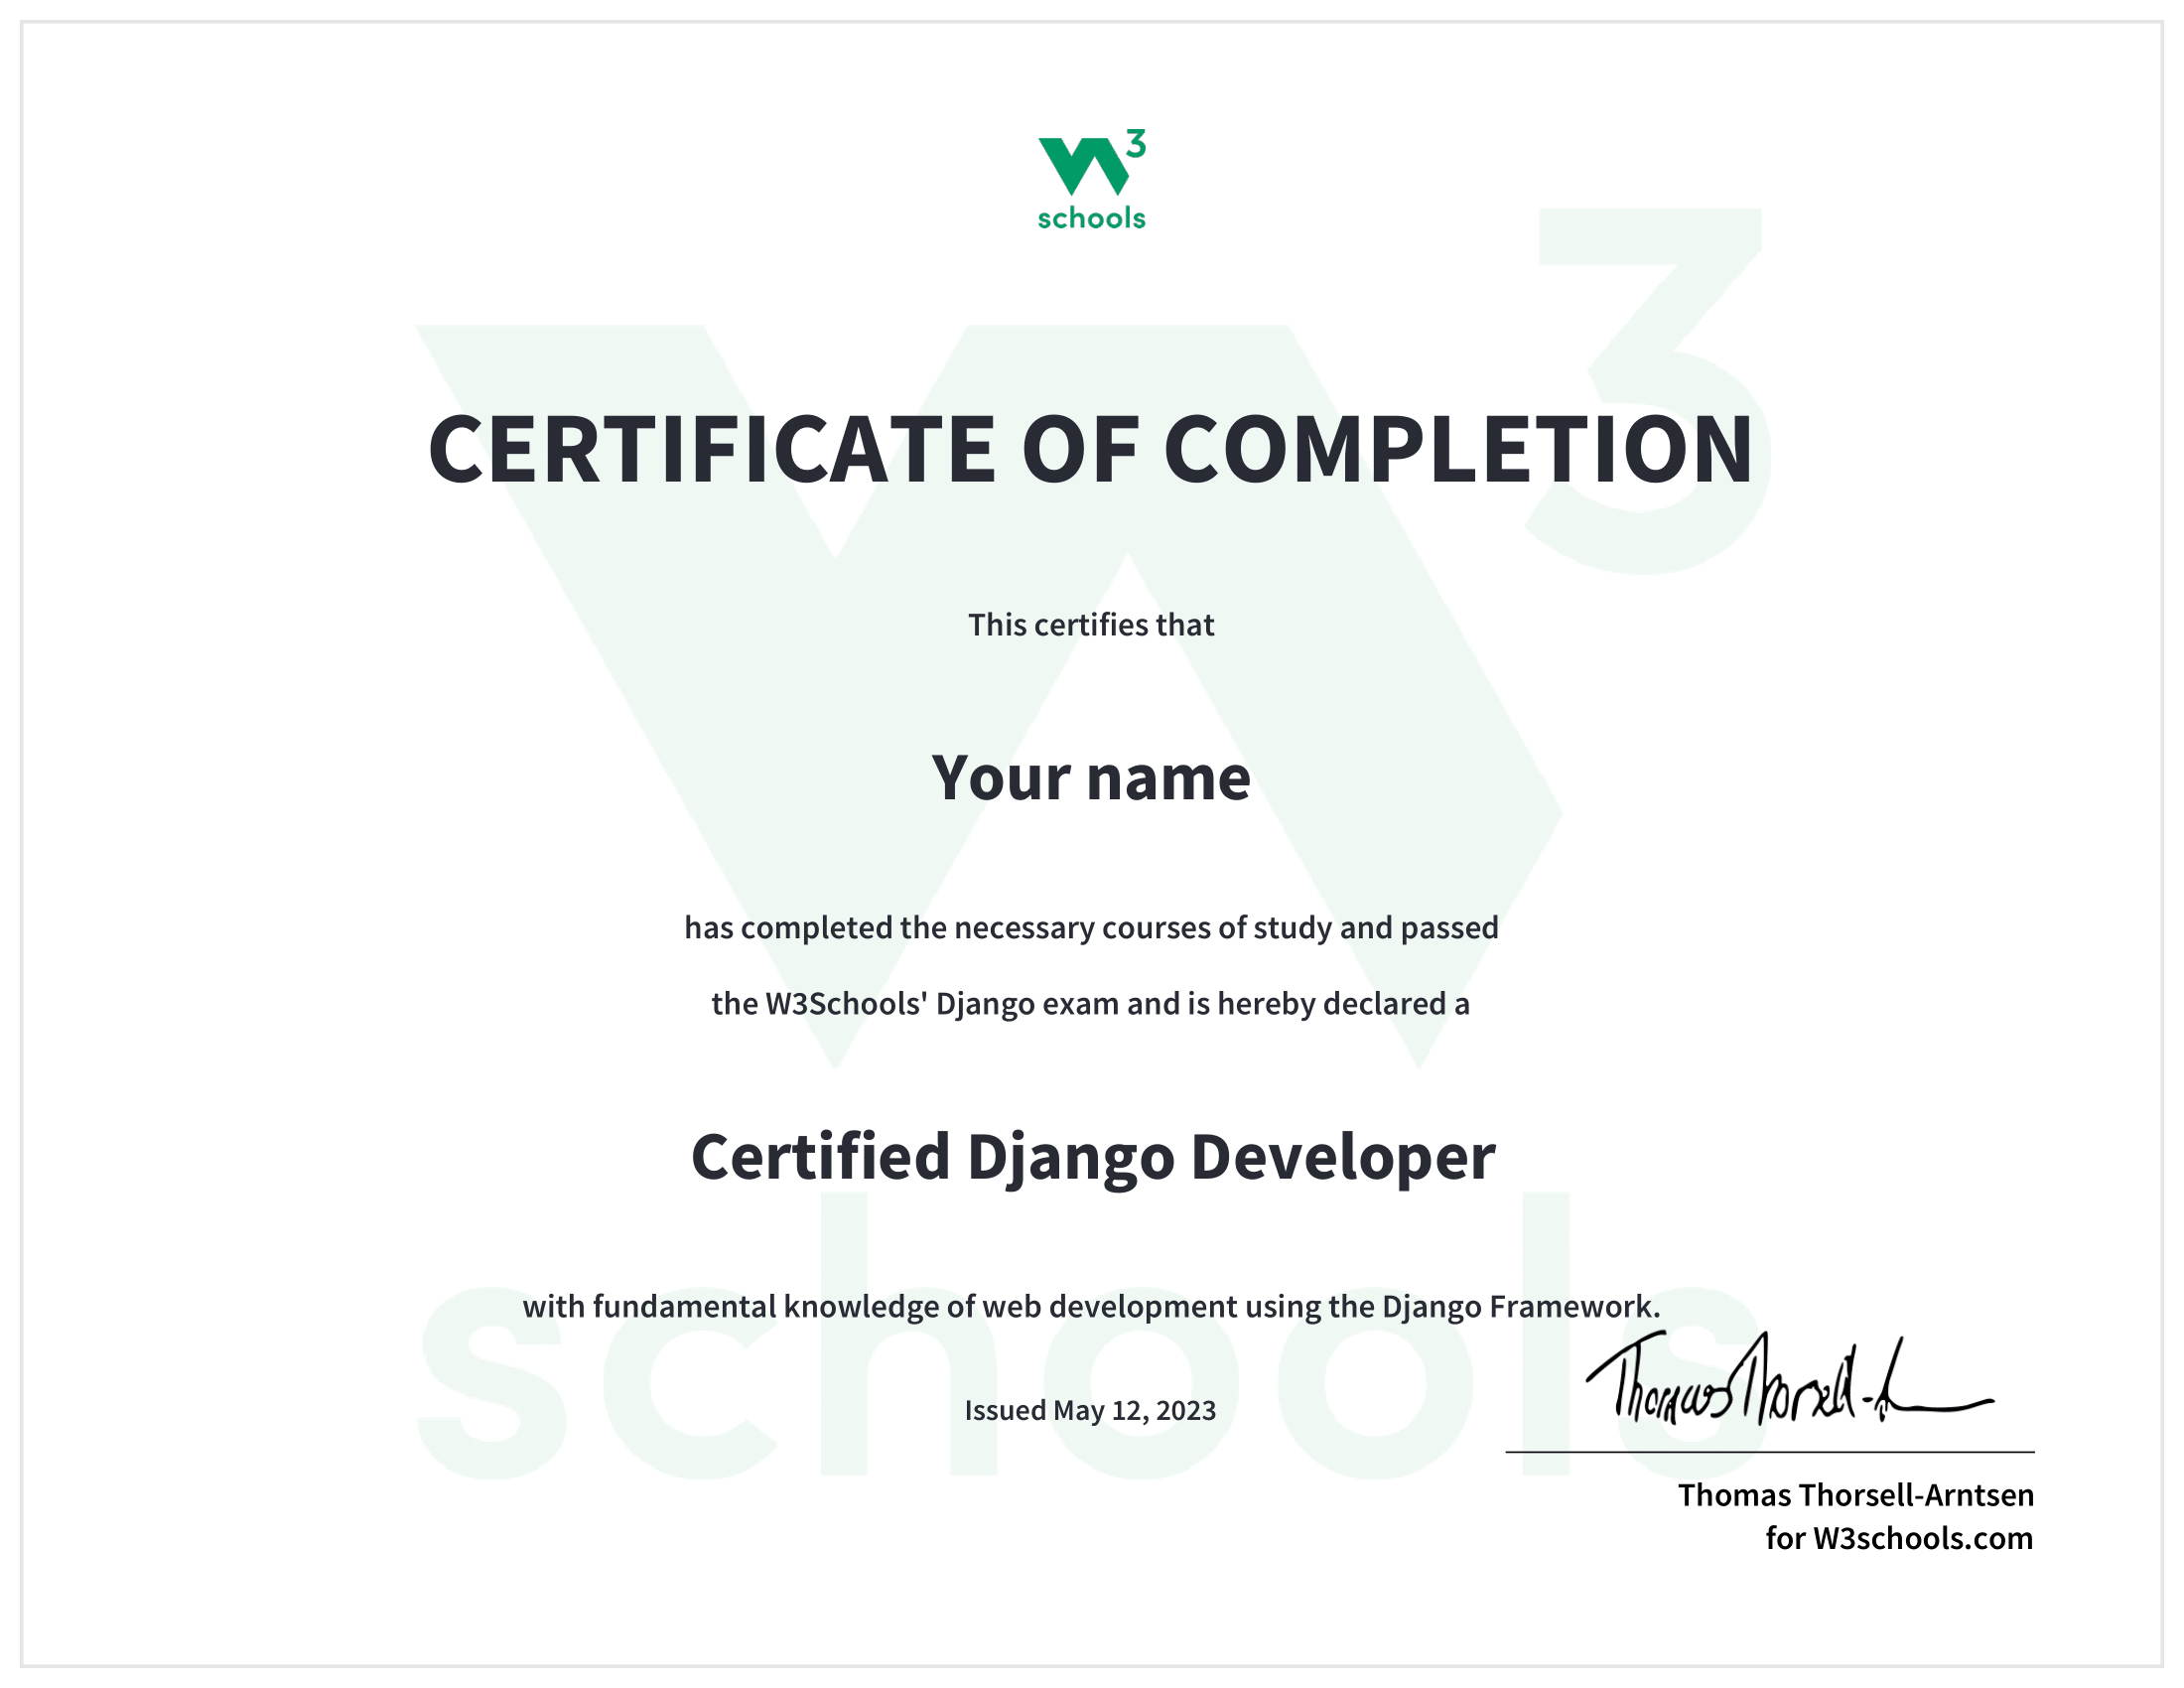 Vue Certificate of Completion